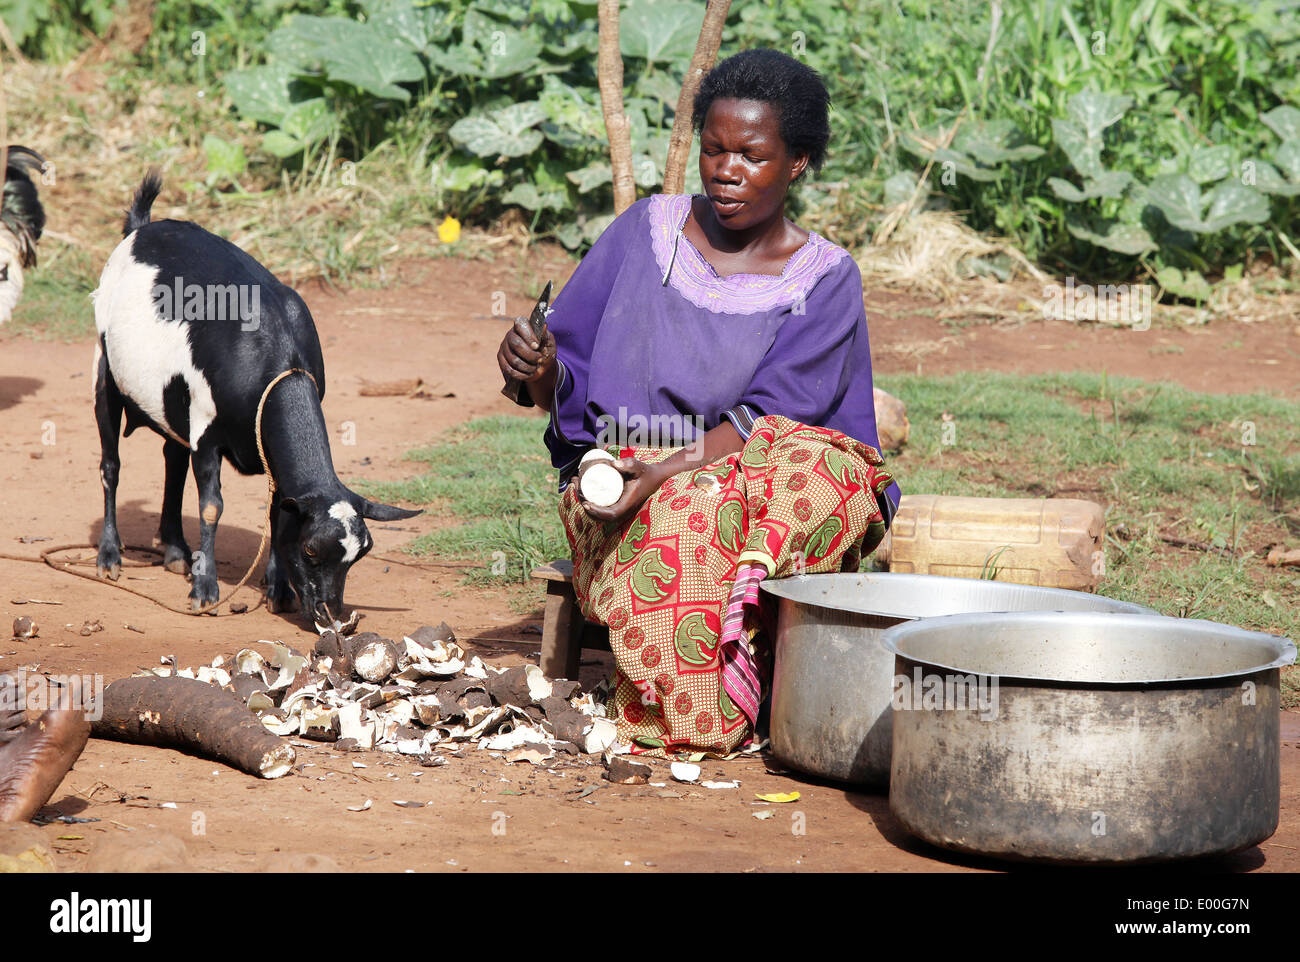 A woman prepares food in a rural area of the Lira district in northern Uganda. Stock Photo